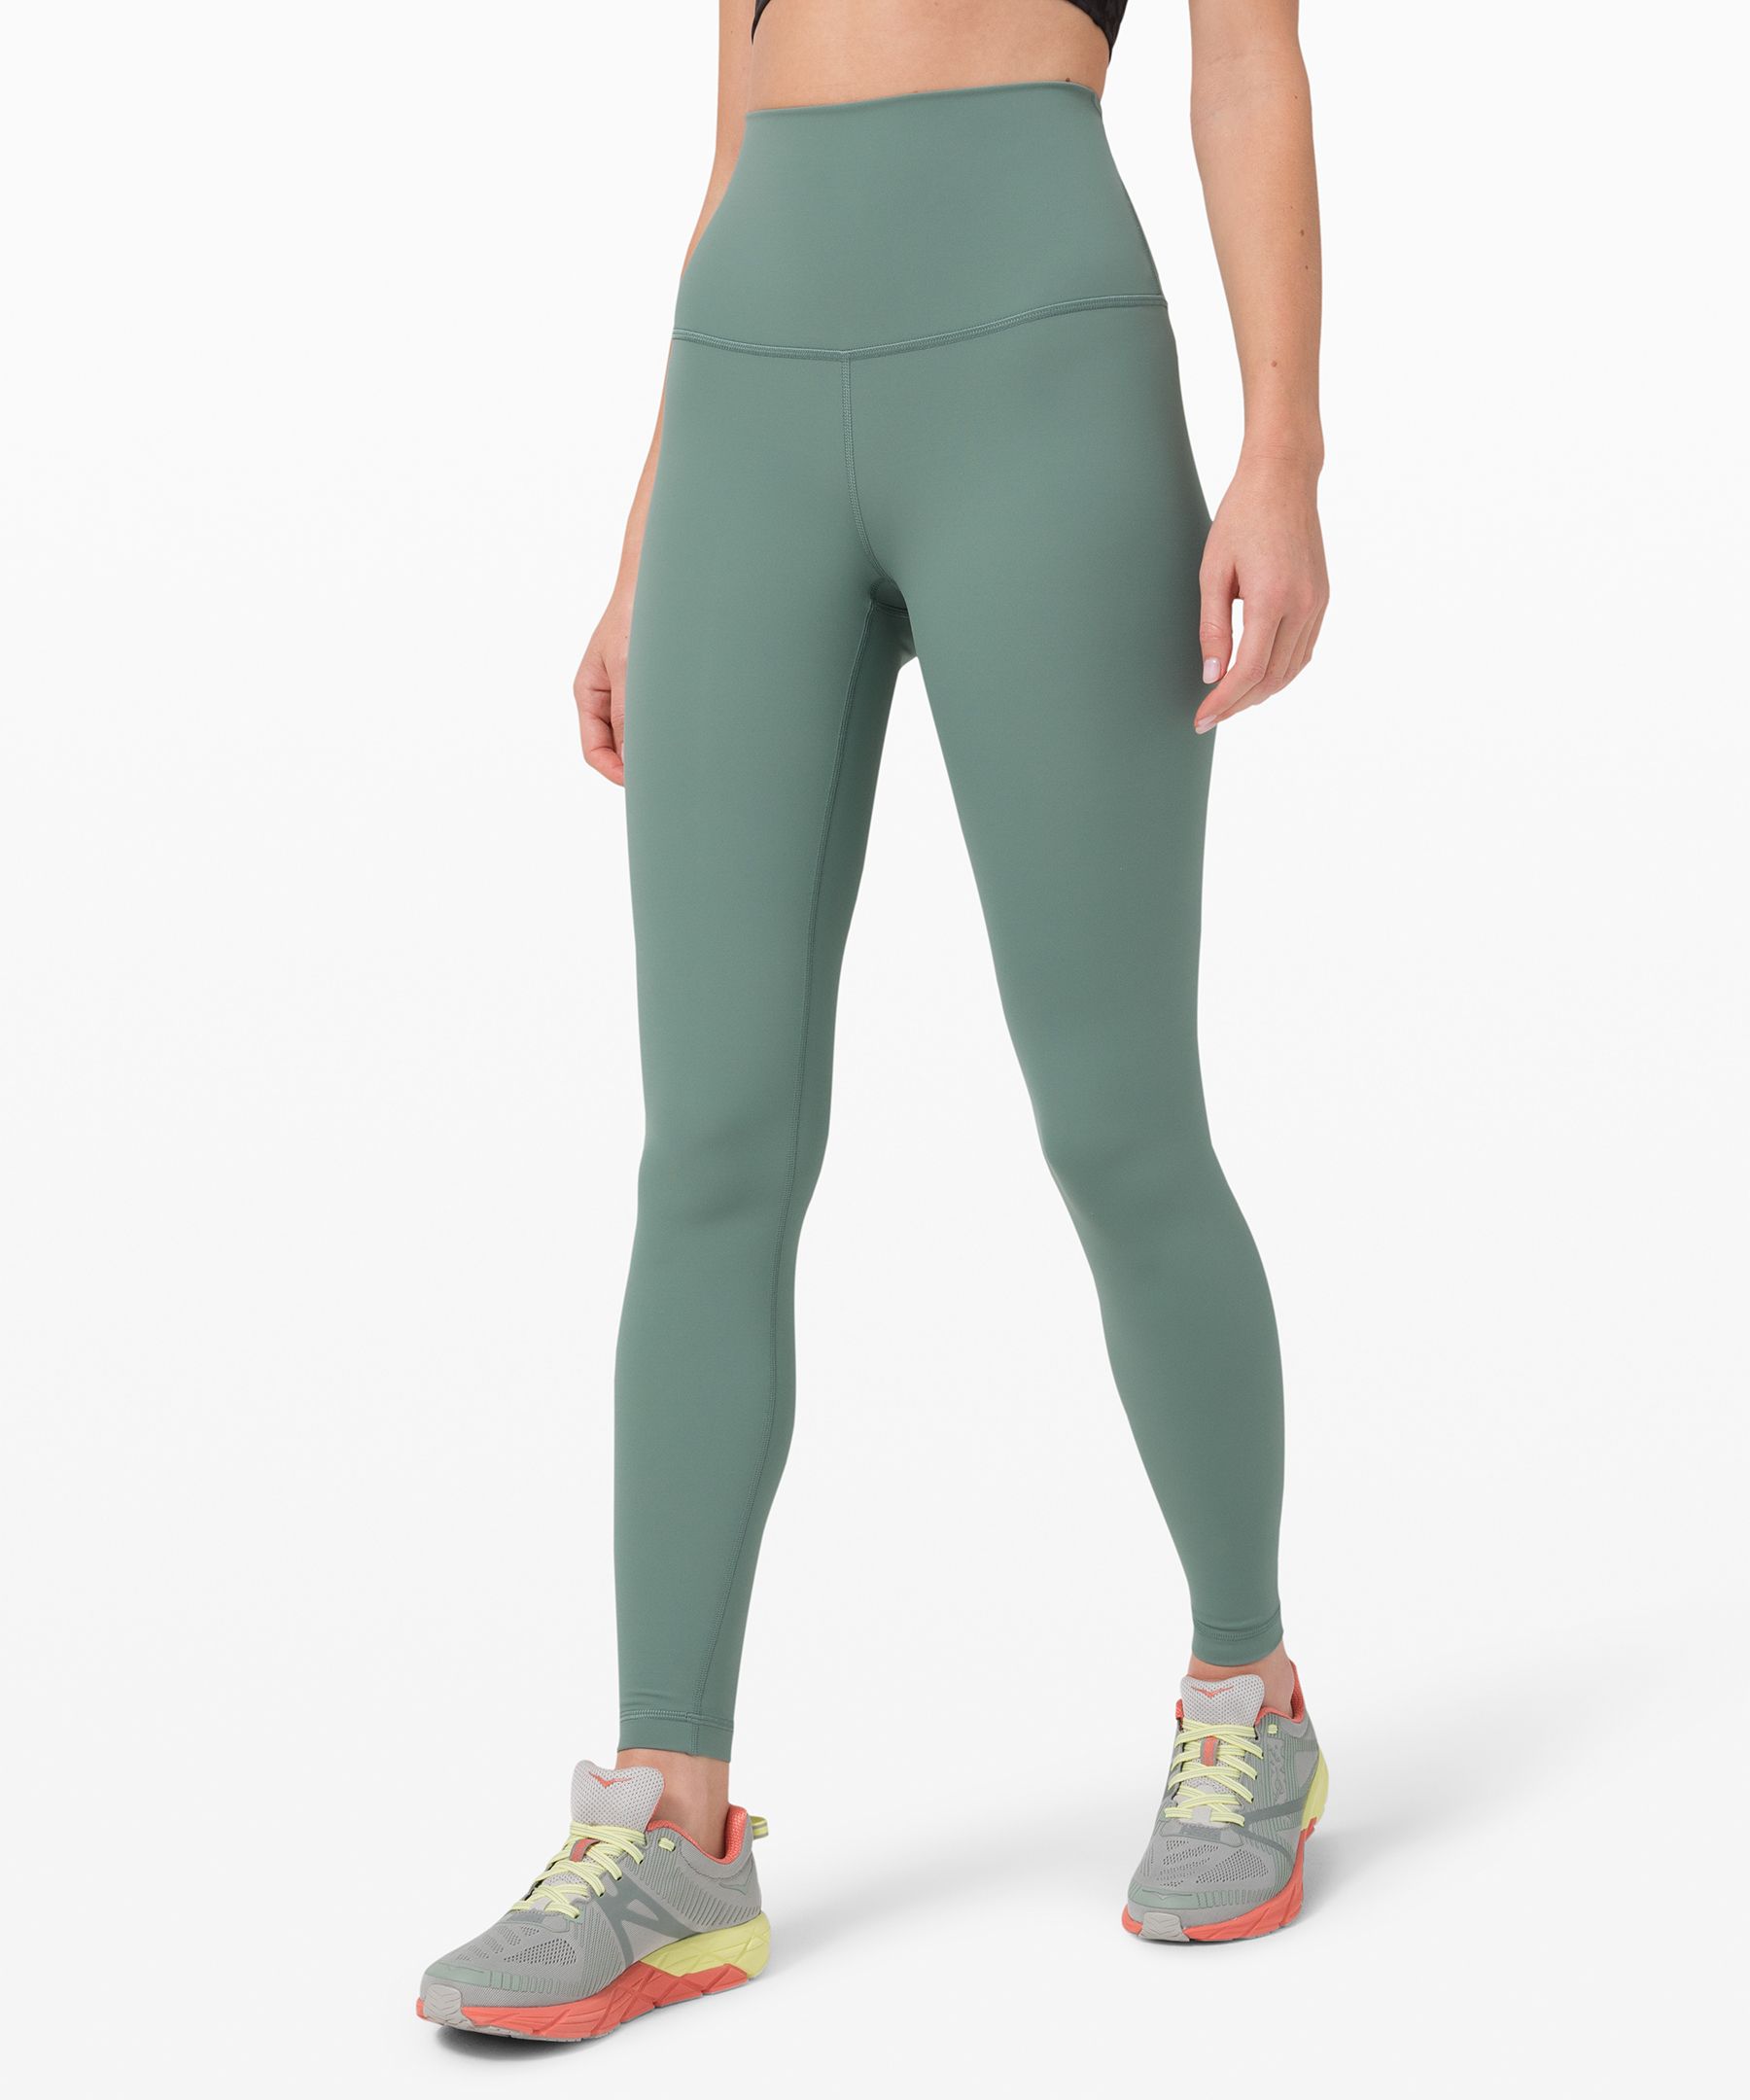 Lululemon Wunder Under Super High-rise Tight *full-on Luxtreme Online Only 28" In Tidewater Teal